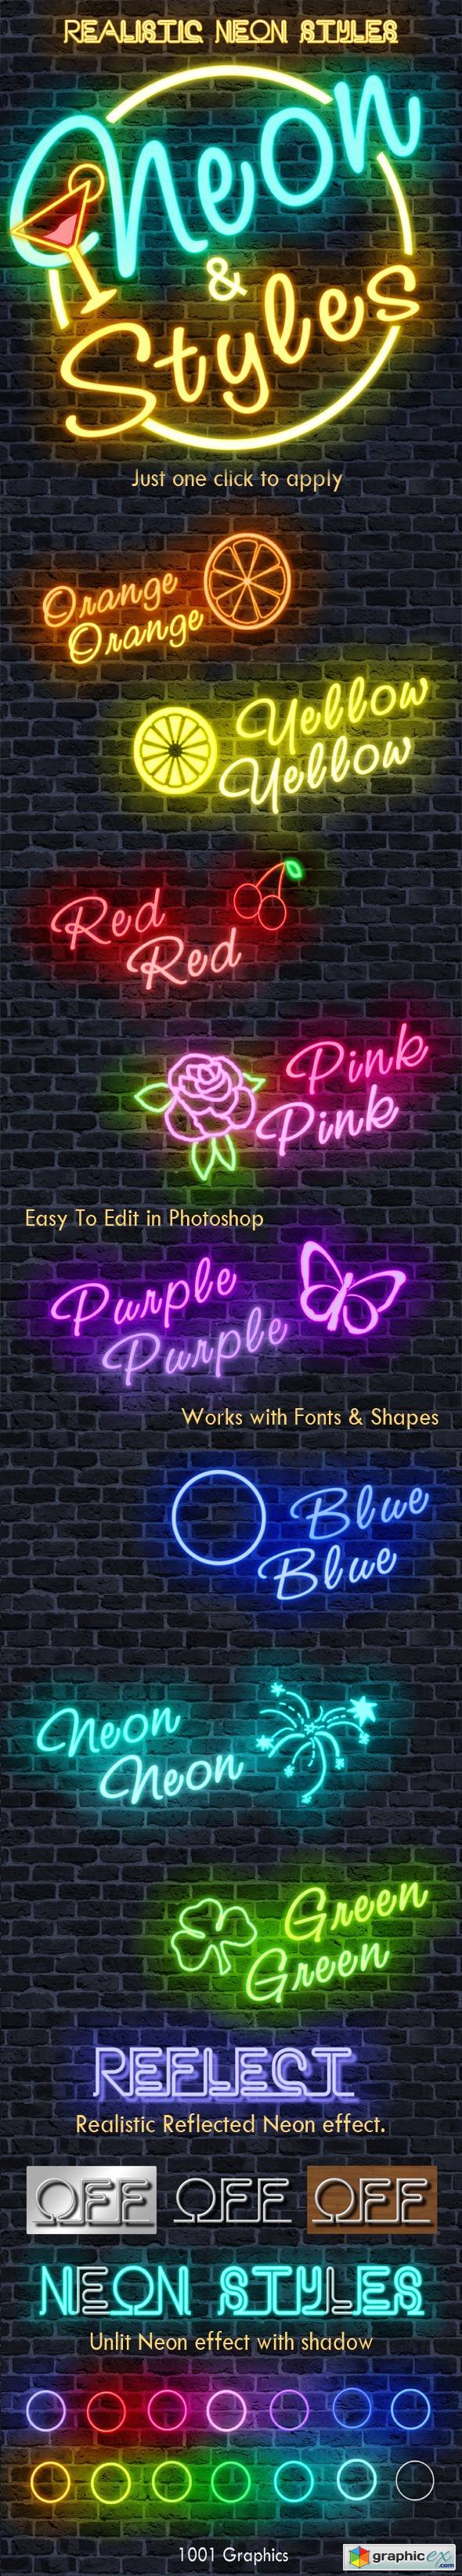 50 Realistic Neon Text Styles